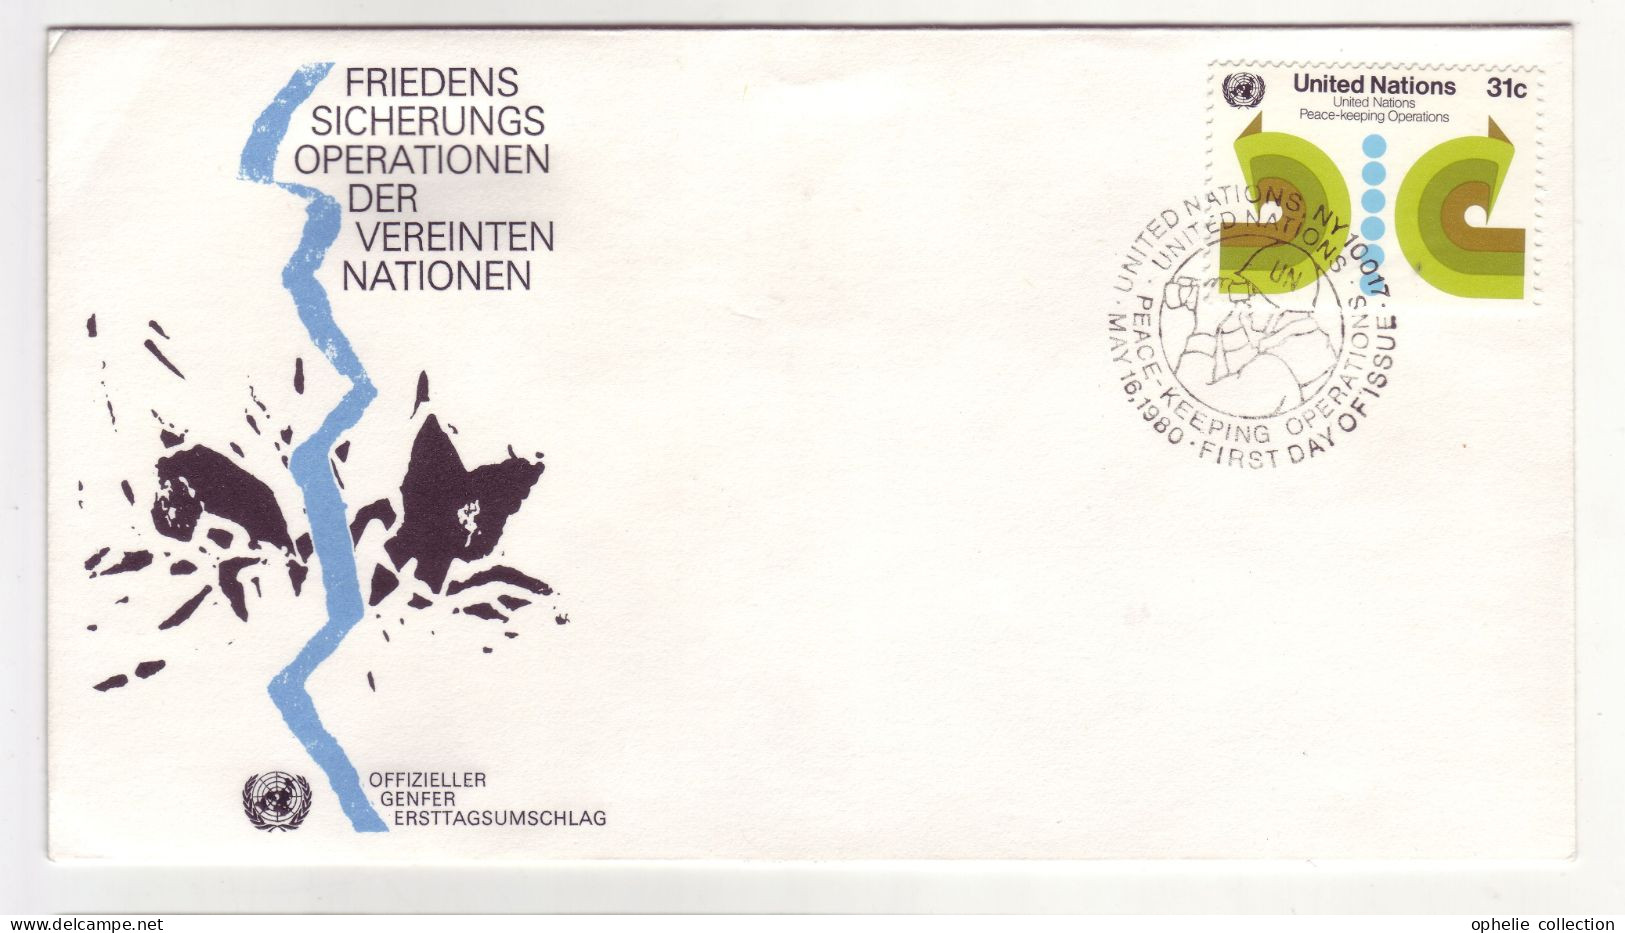 Nations Unies - Vienne FDC - 16/05/1980 - Peace Keeping Operations - M324 - Oblitérés